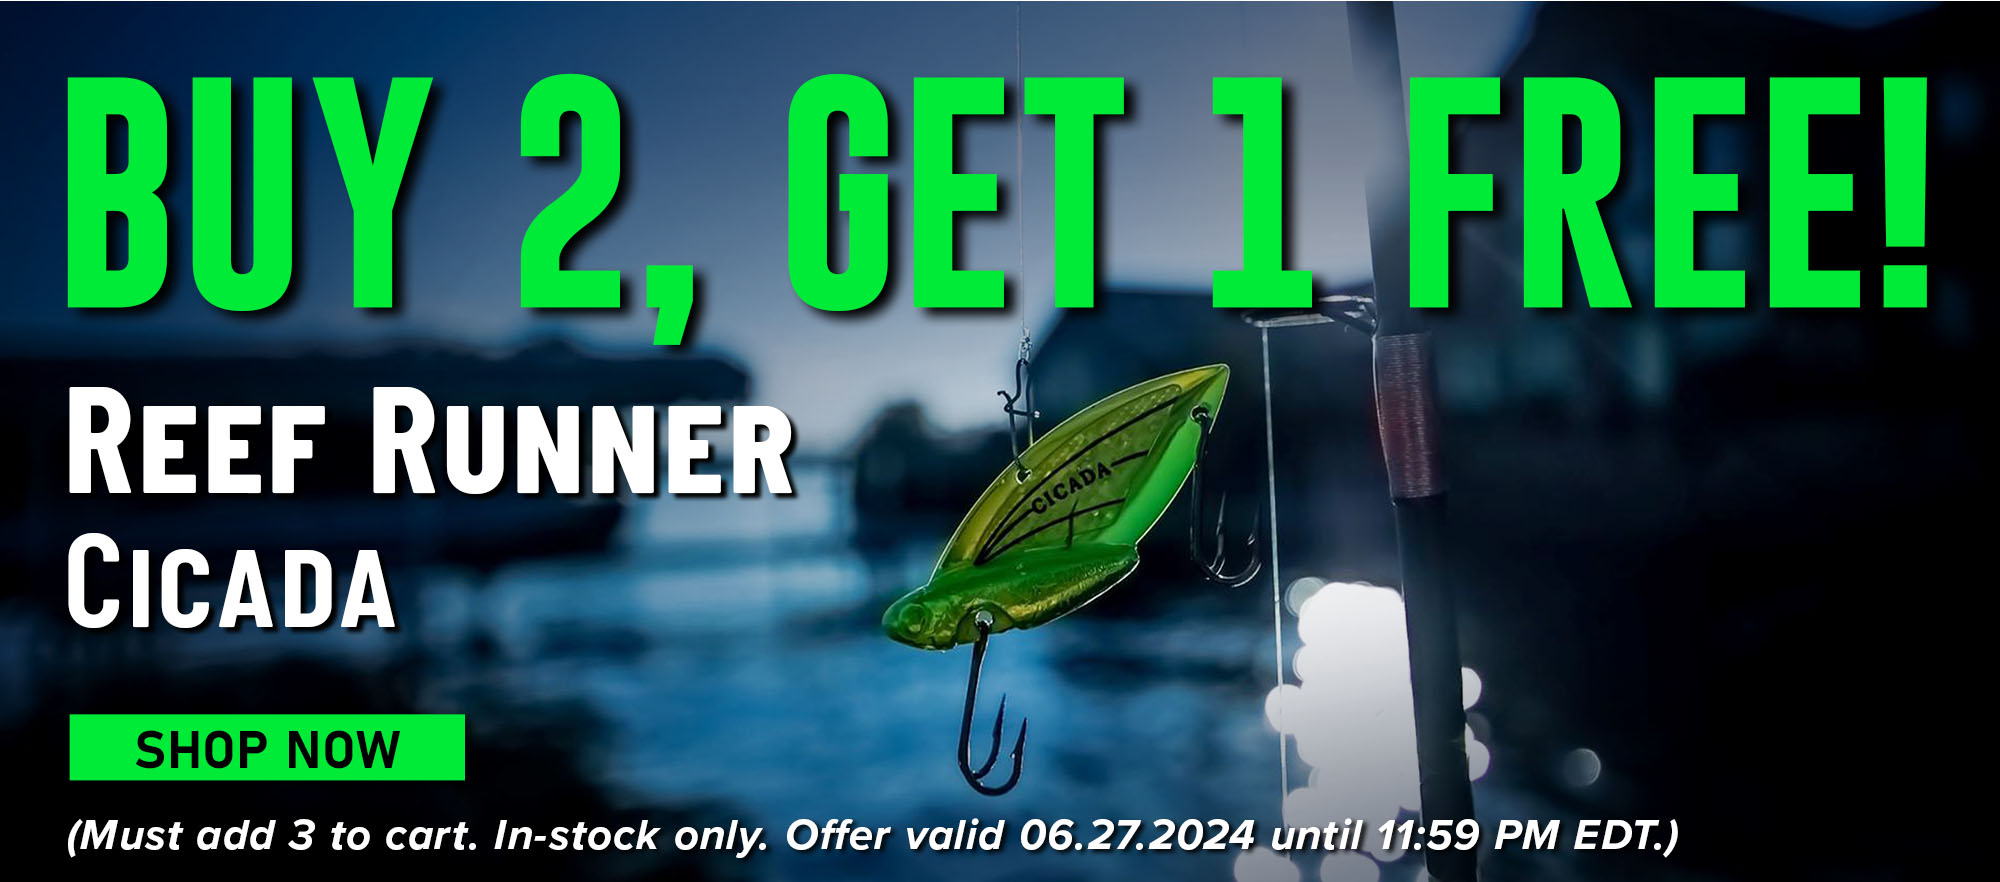 Buy 2, Get 1 Free! Reef Runner Cicada Shop Now (Must add 3 to cart. In-stock only. Offer valid 06.27.2024 until 11:59 PM EDT.)